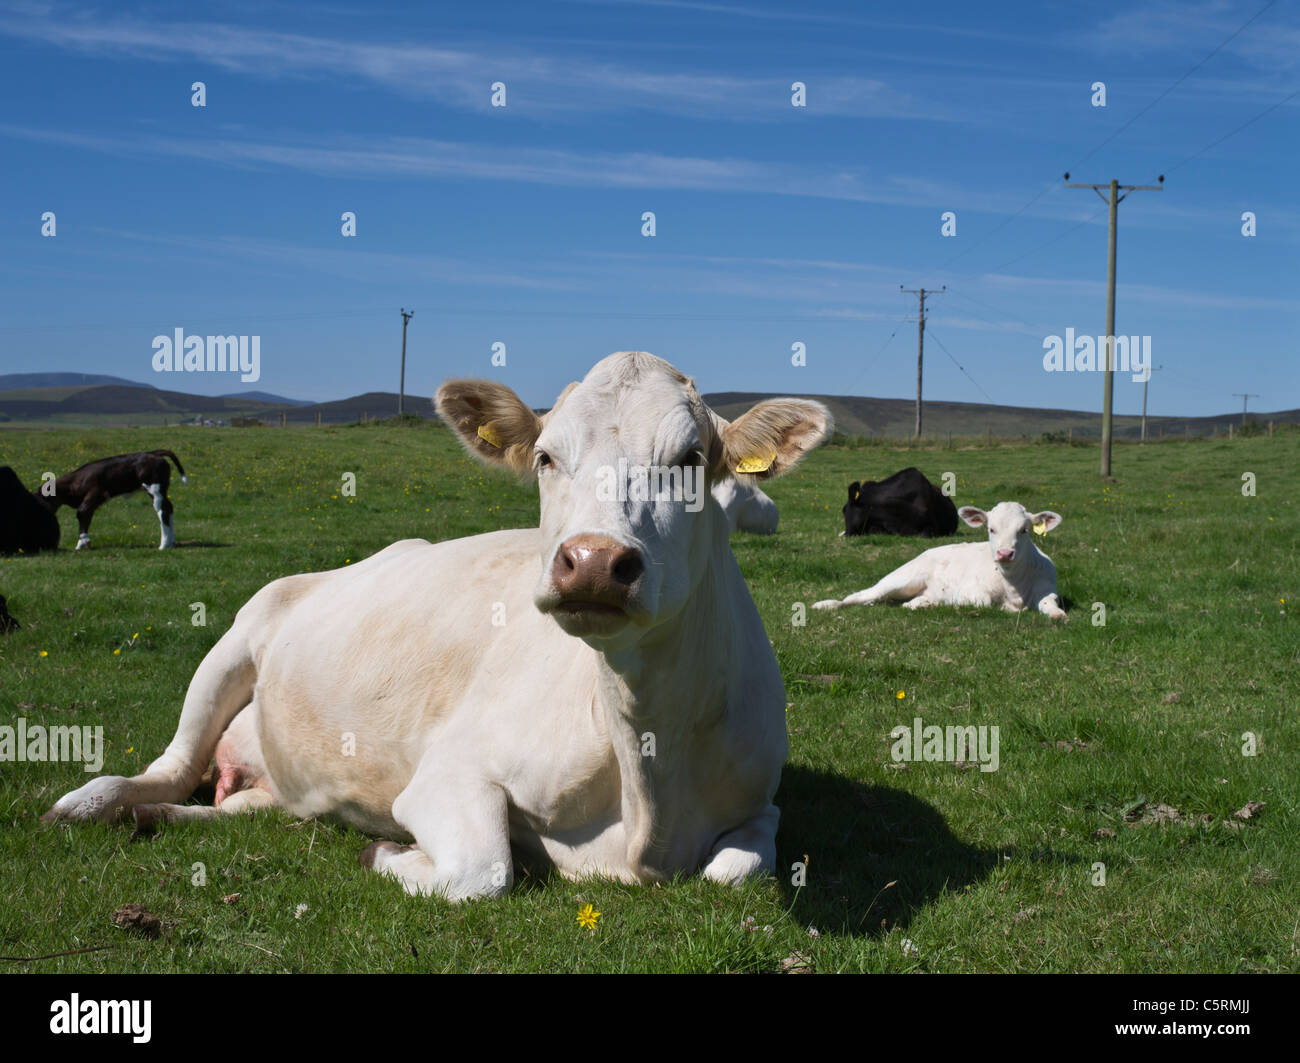 dh Scotland beef Cows ANIMALS UK British Cow calf cross laying farming cattle sitting in down field sit Stock Photo